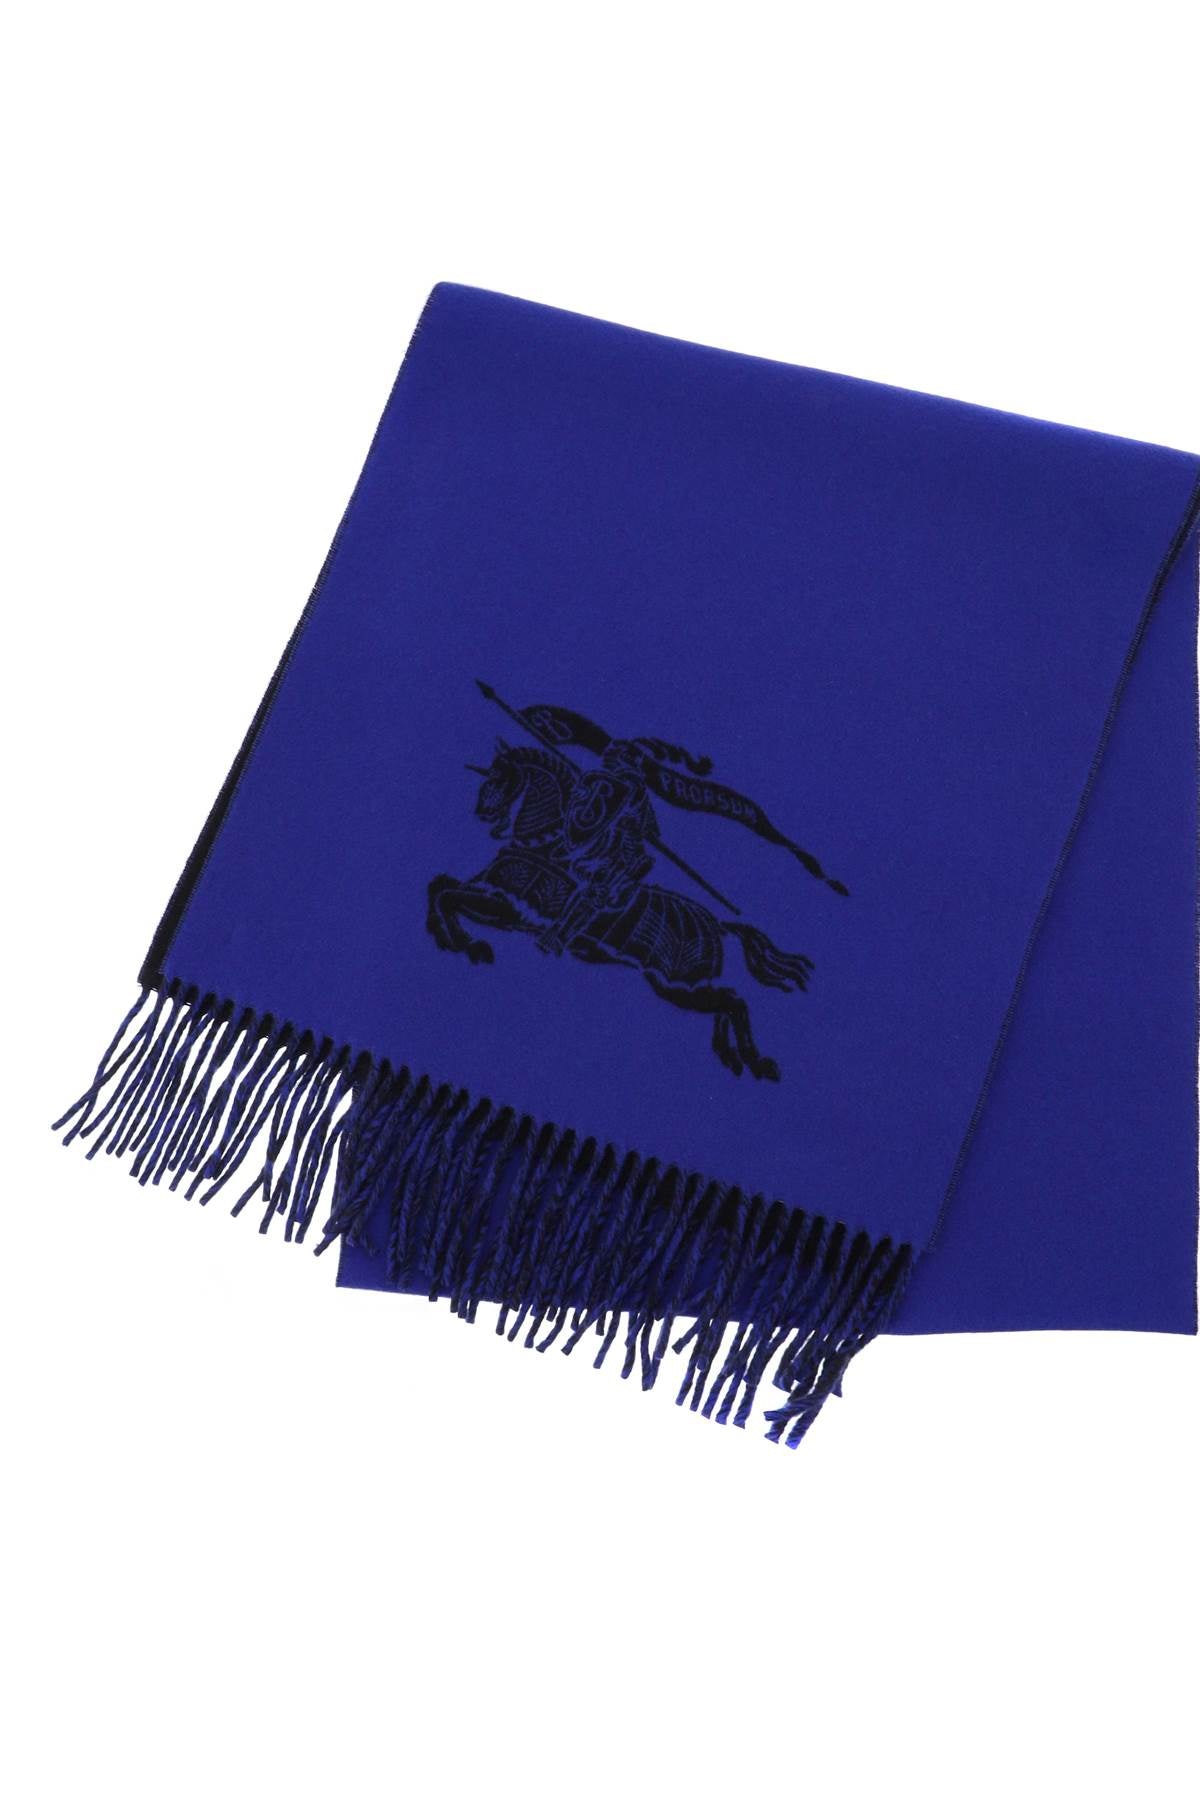 Shop Burberry Reversible Cashmere Scarf With Jacquard Equestrian Knight Design For Men In Multicolor